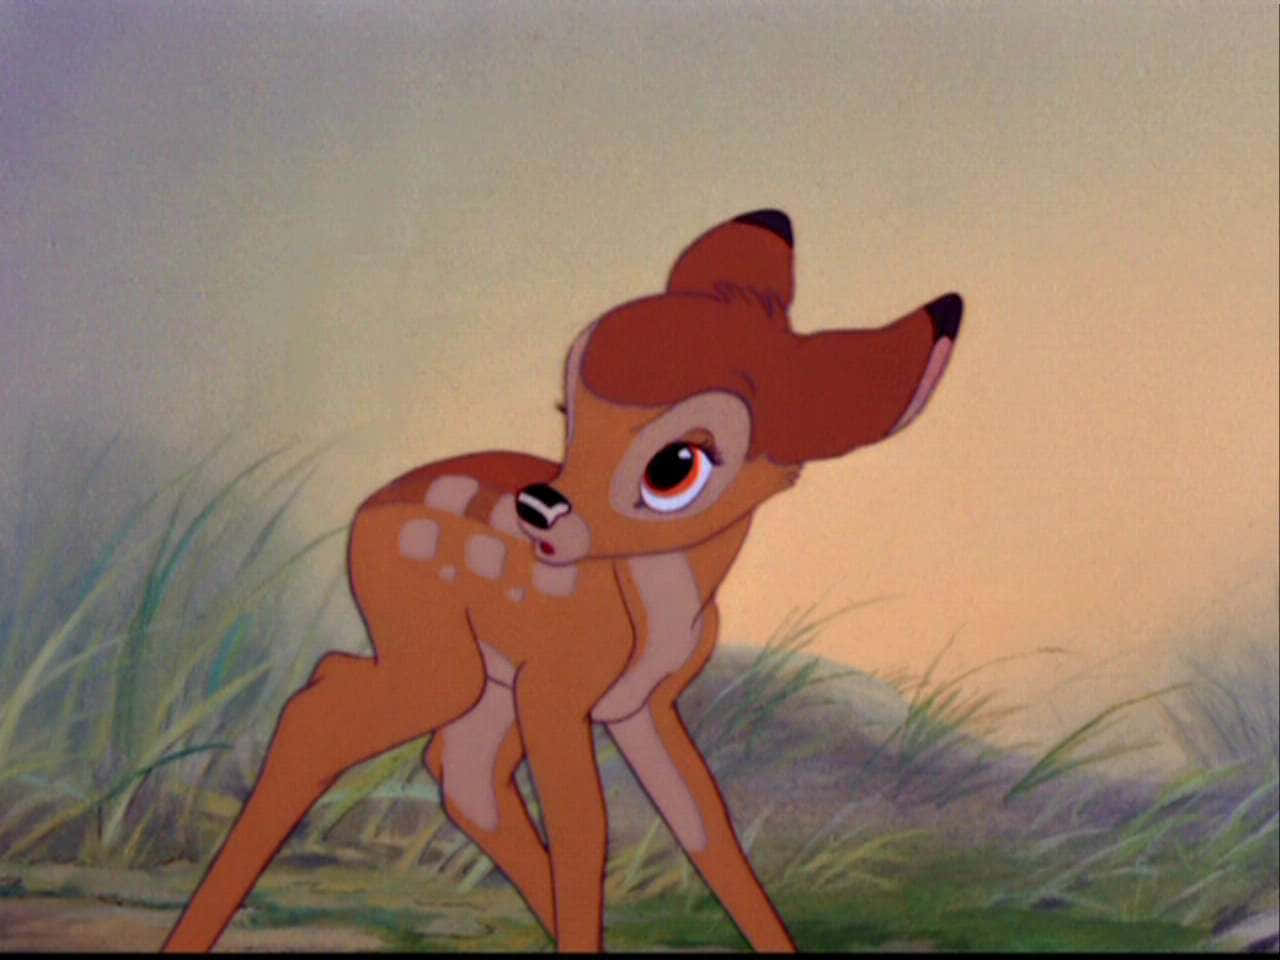 Bambi, an iconic character from a beloved childhood classic